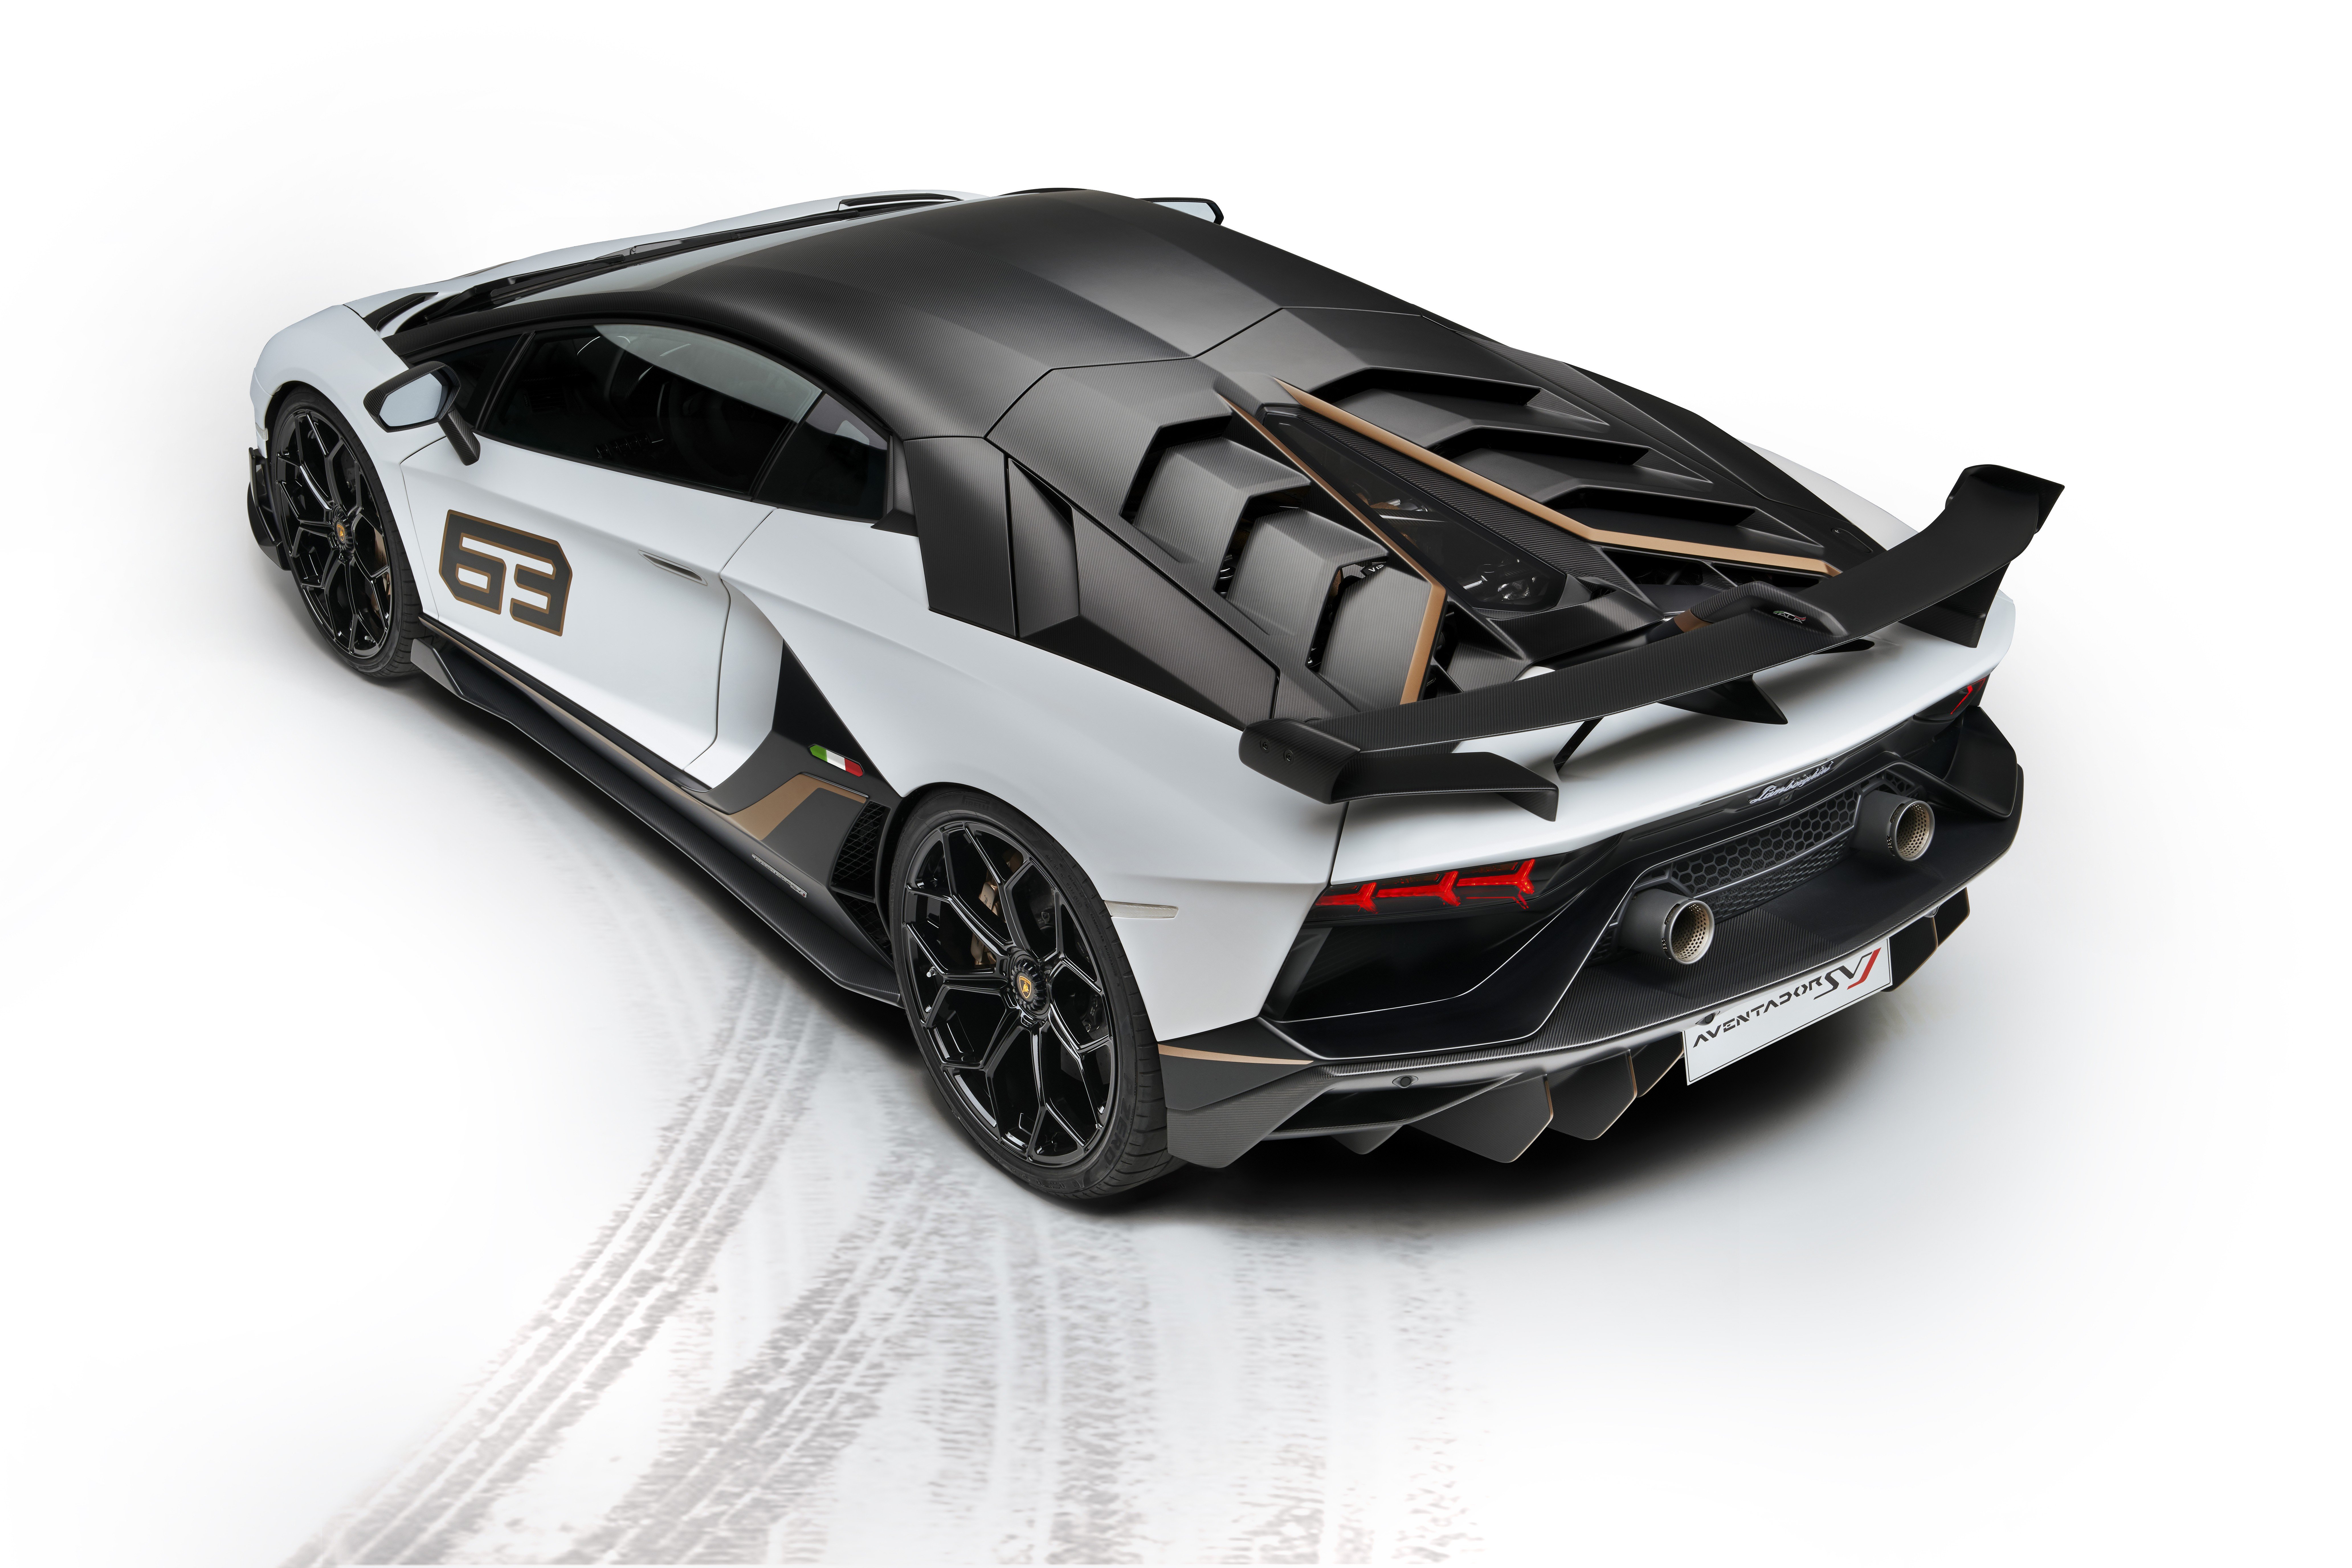 Lamborghini has produced a special- edition Aventador SVJ 63 in honour of the marque’s founding in 1963.